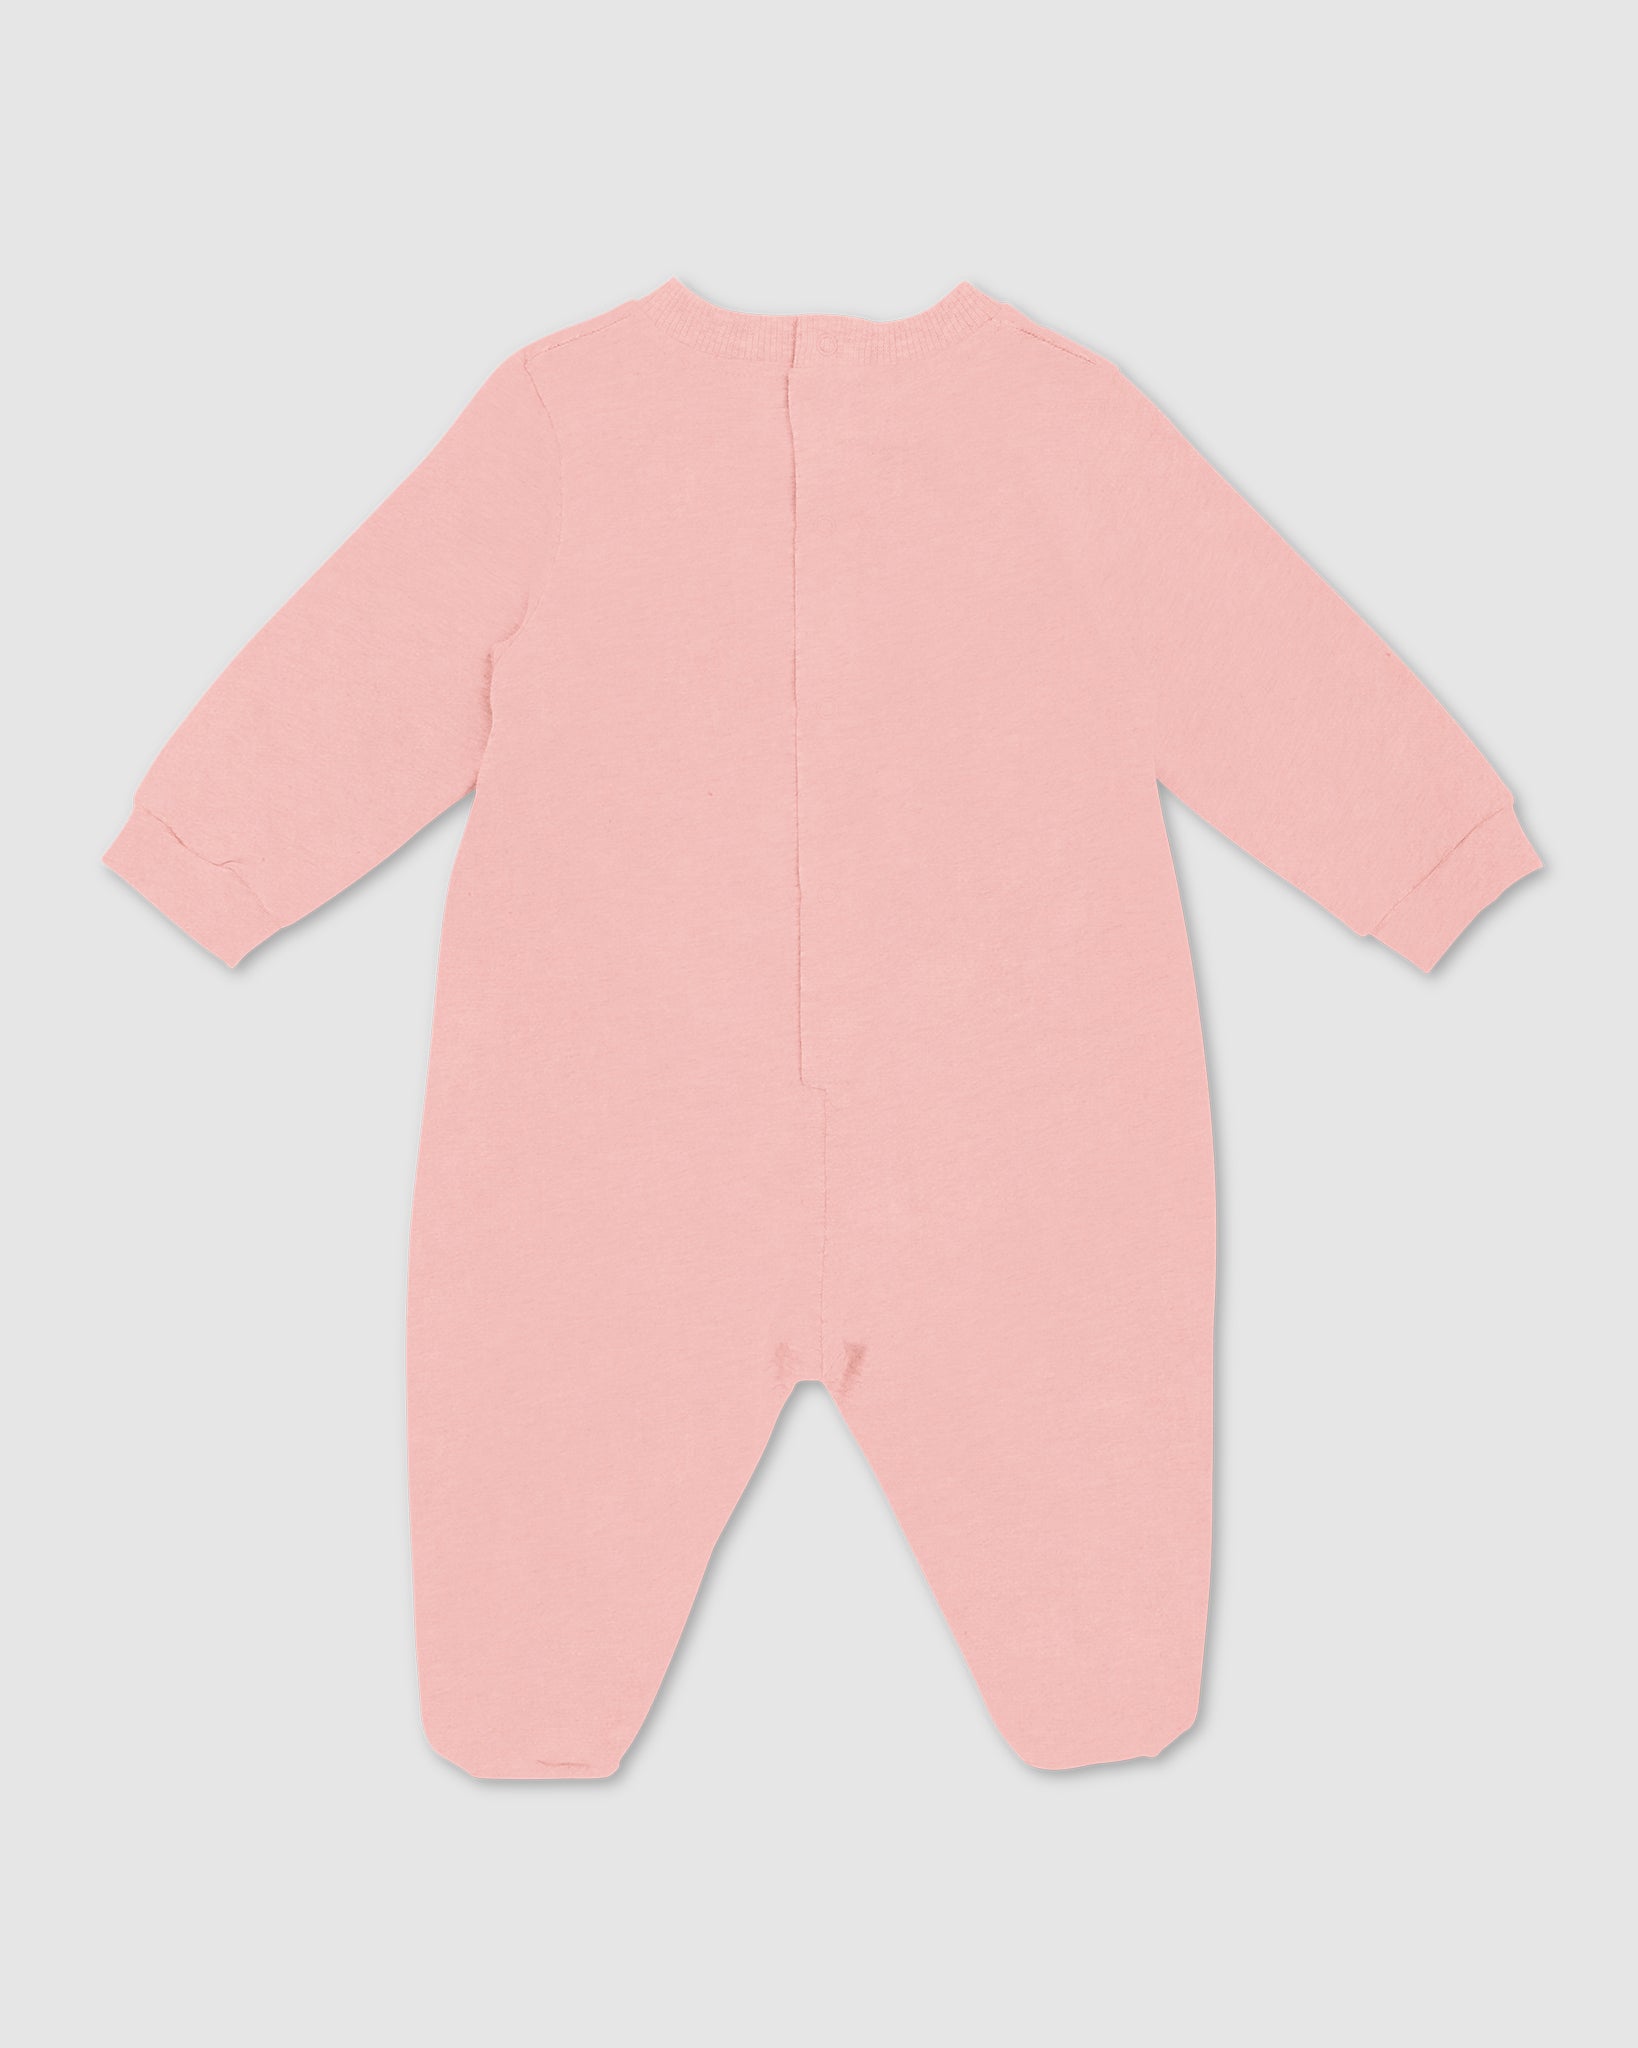 Playsuits | Set and Cherry White/Pink GCDS Girl Off Gift Baby Playsuit: